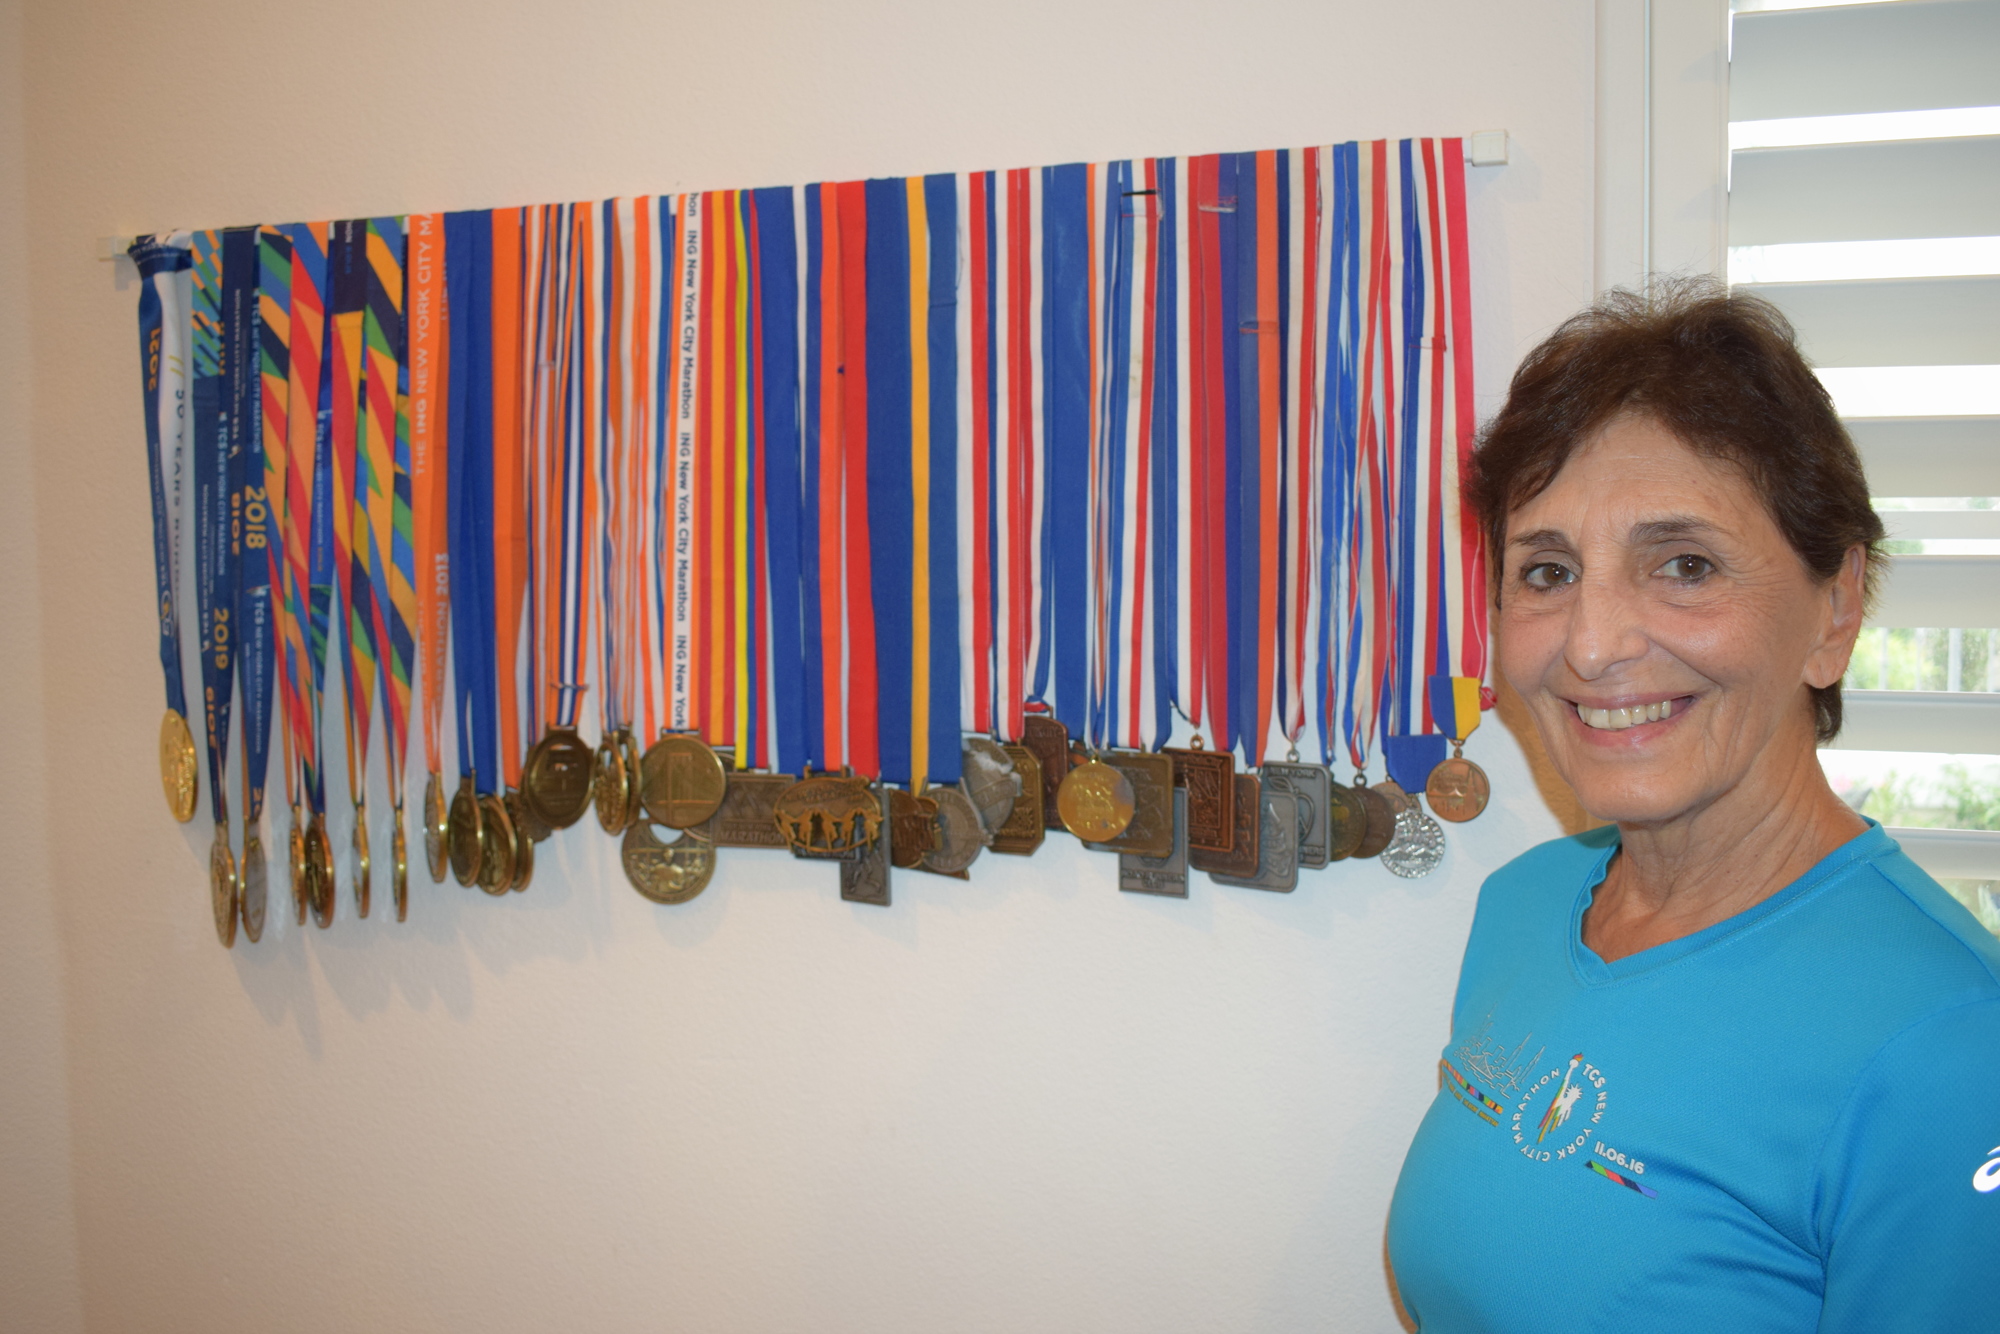 Connie Lyke-Brown's husband says he is going to need to build her another rack to hold her New York City Marathon medals.